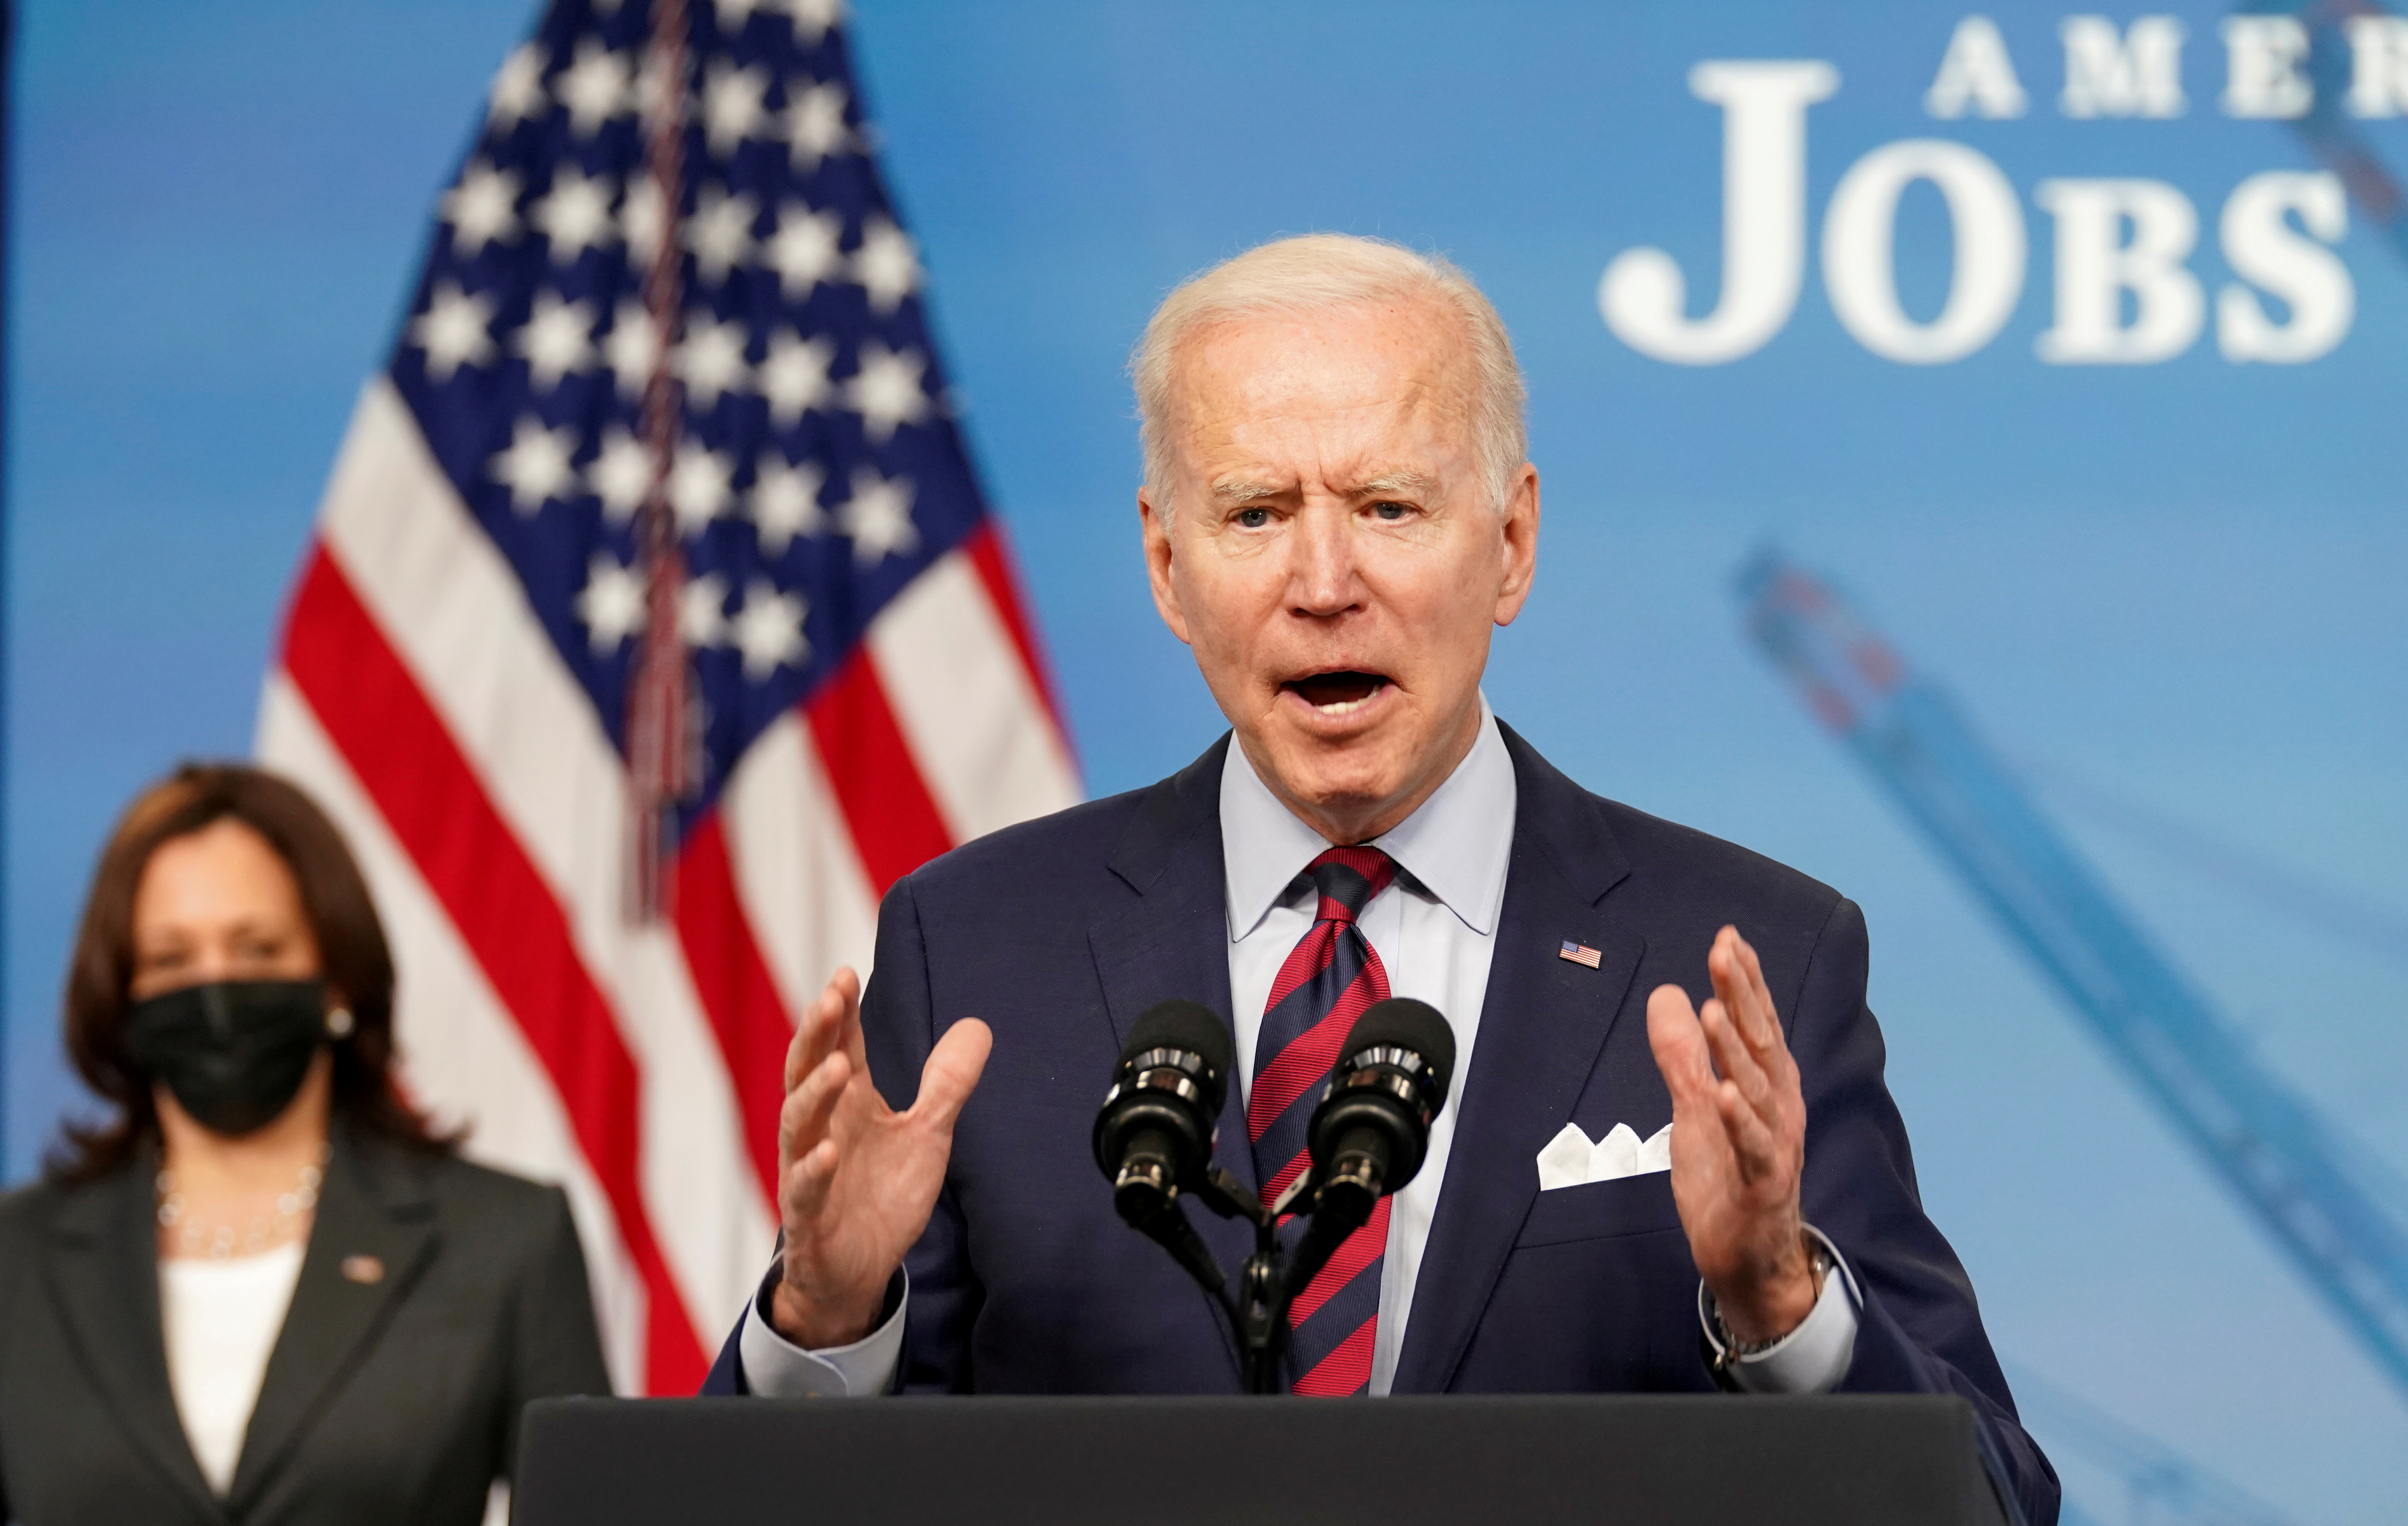 President Biden speaks about jobs and the economy from the White House in Washington